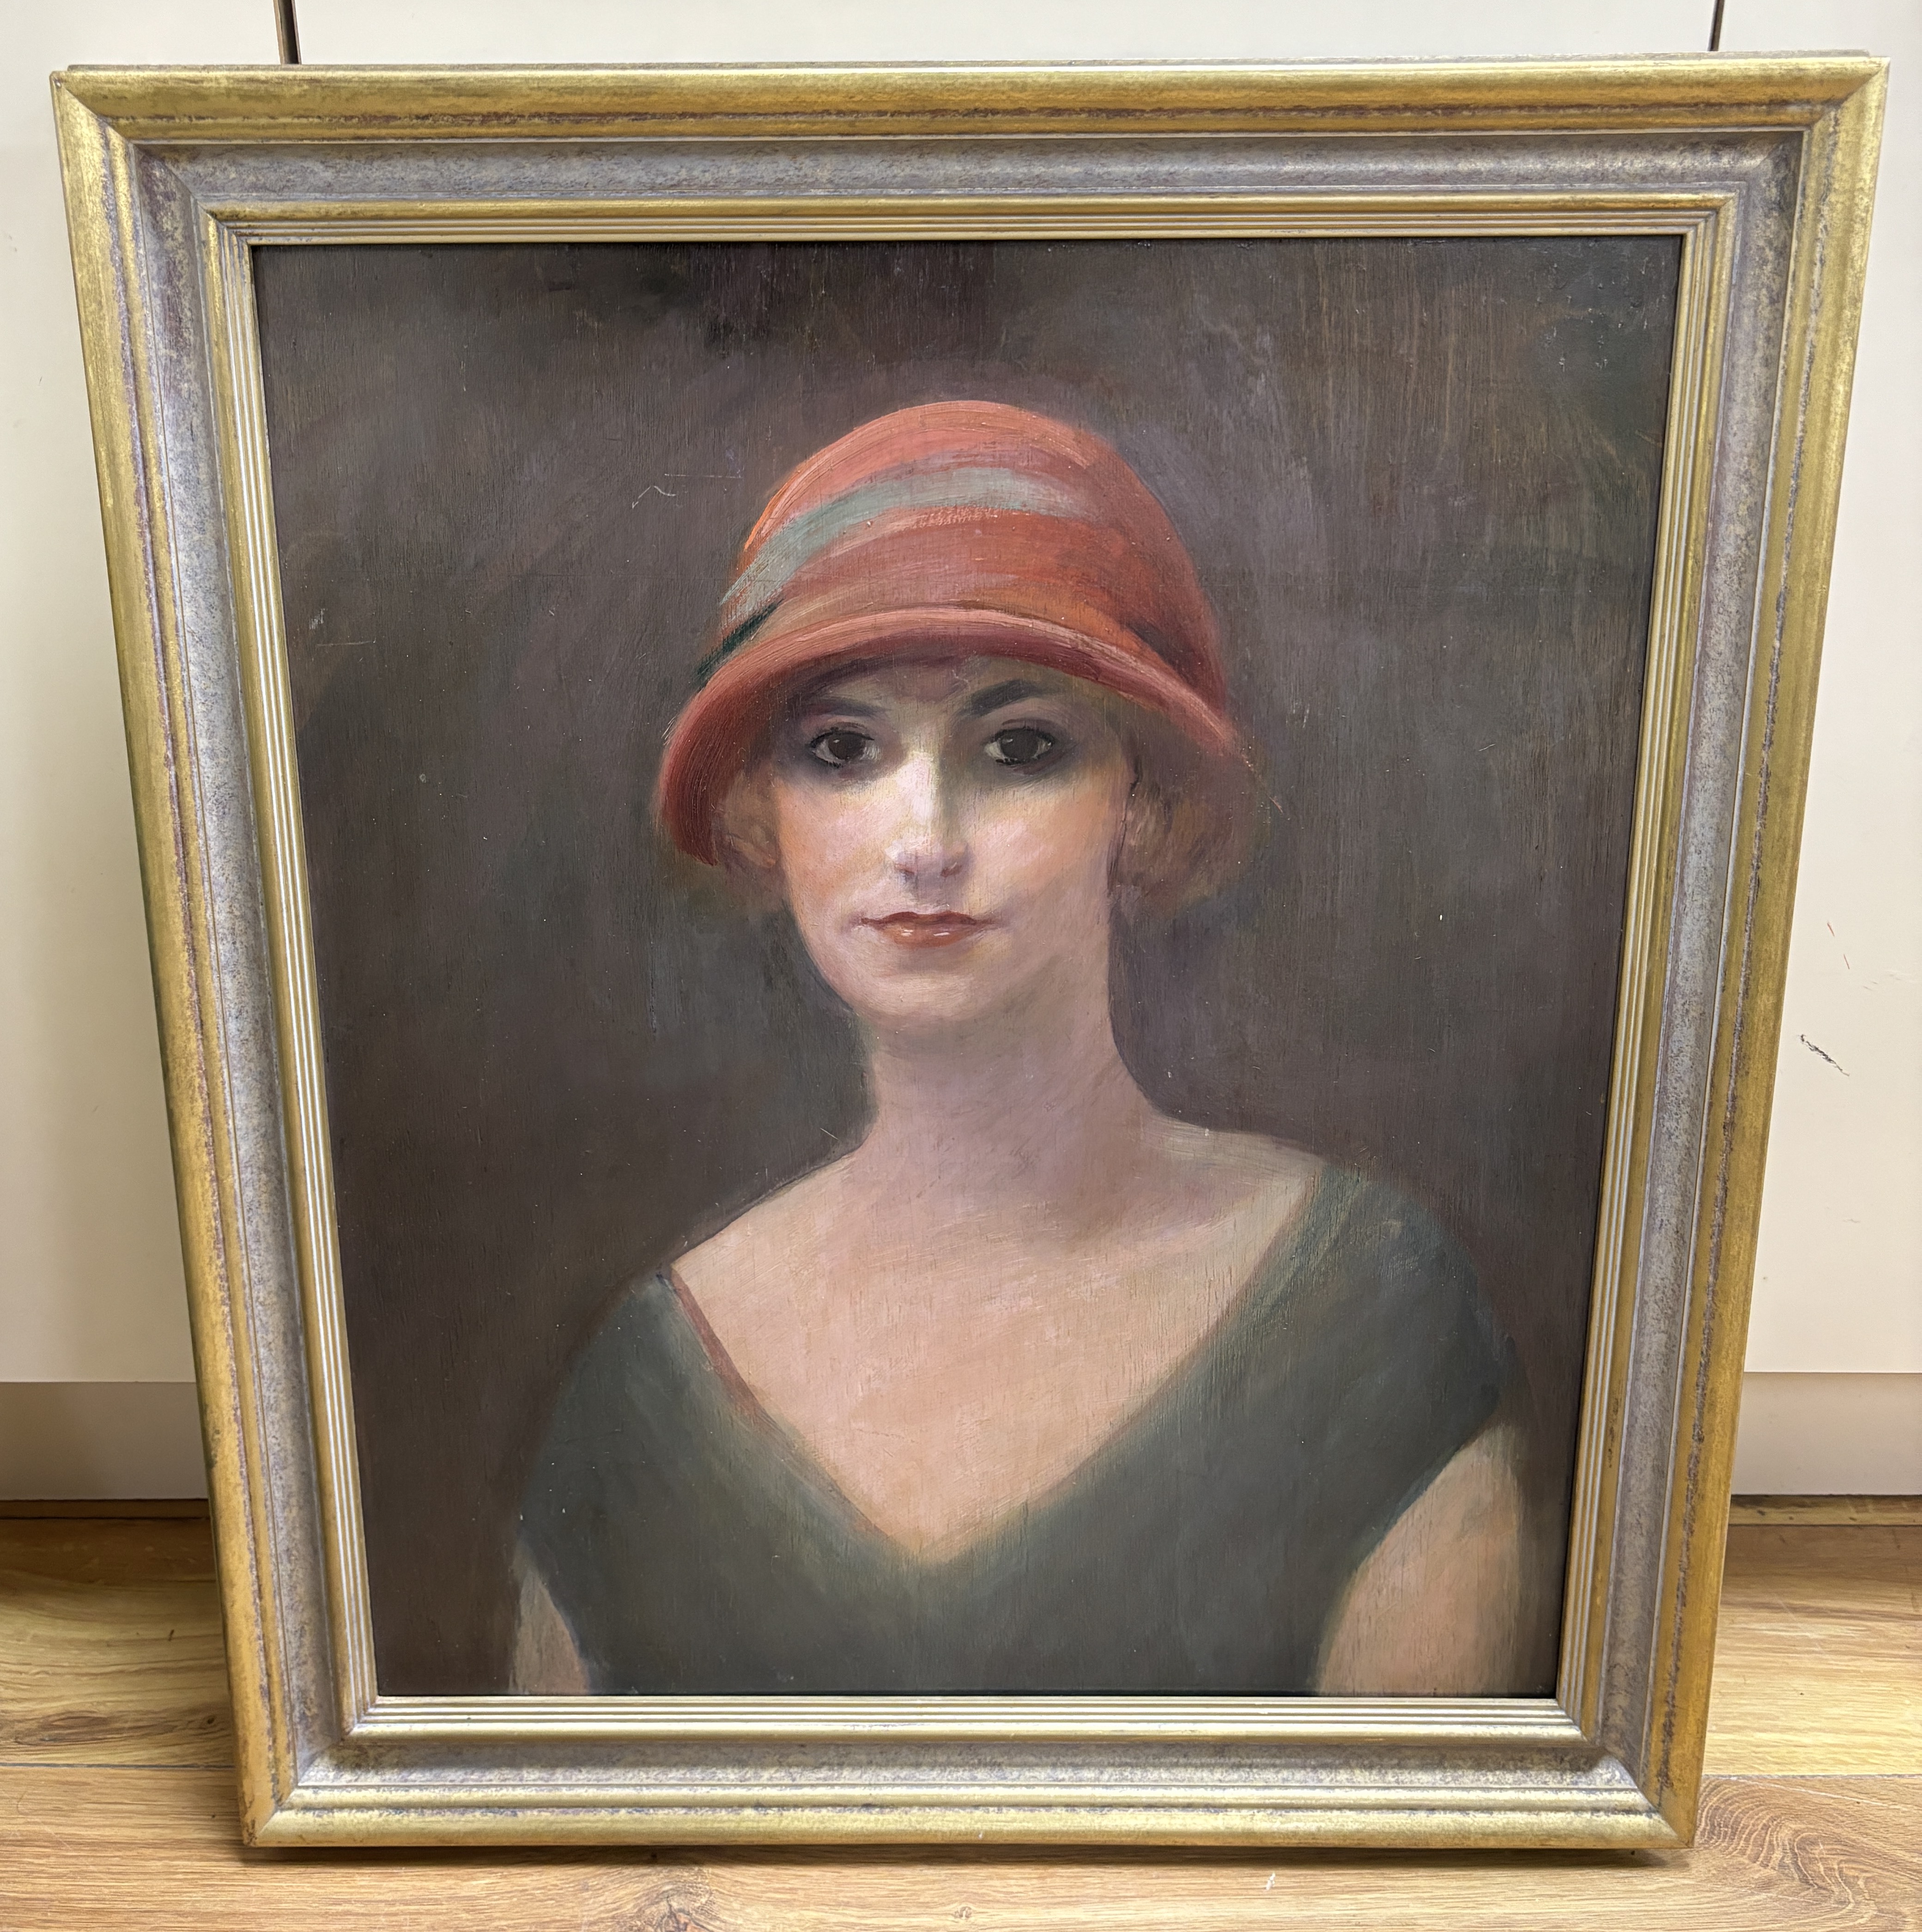 Oil on board, possibly Danish, Head and shoulders portrait of an Art Deco woman, 59 x 50cm